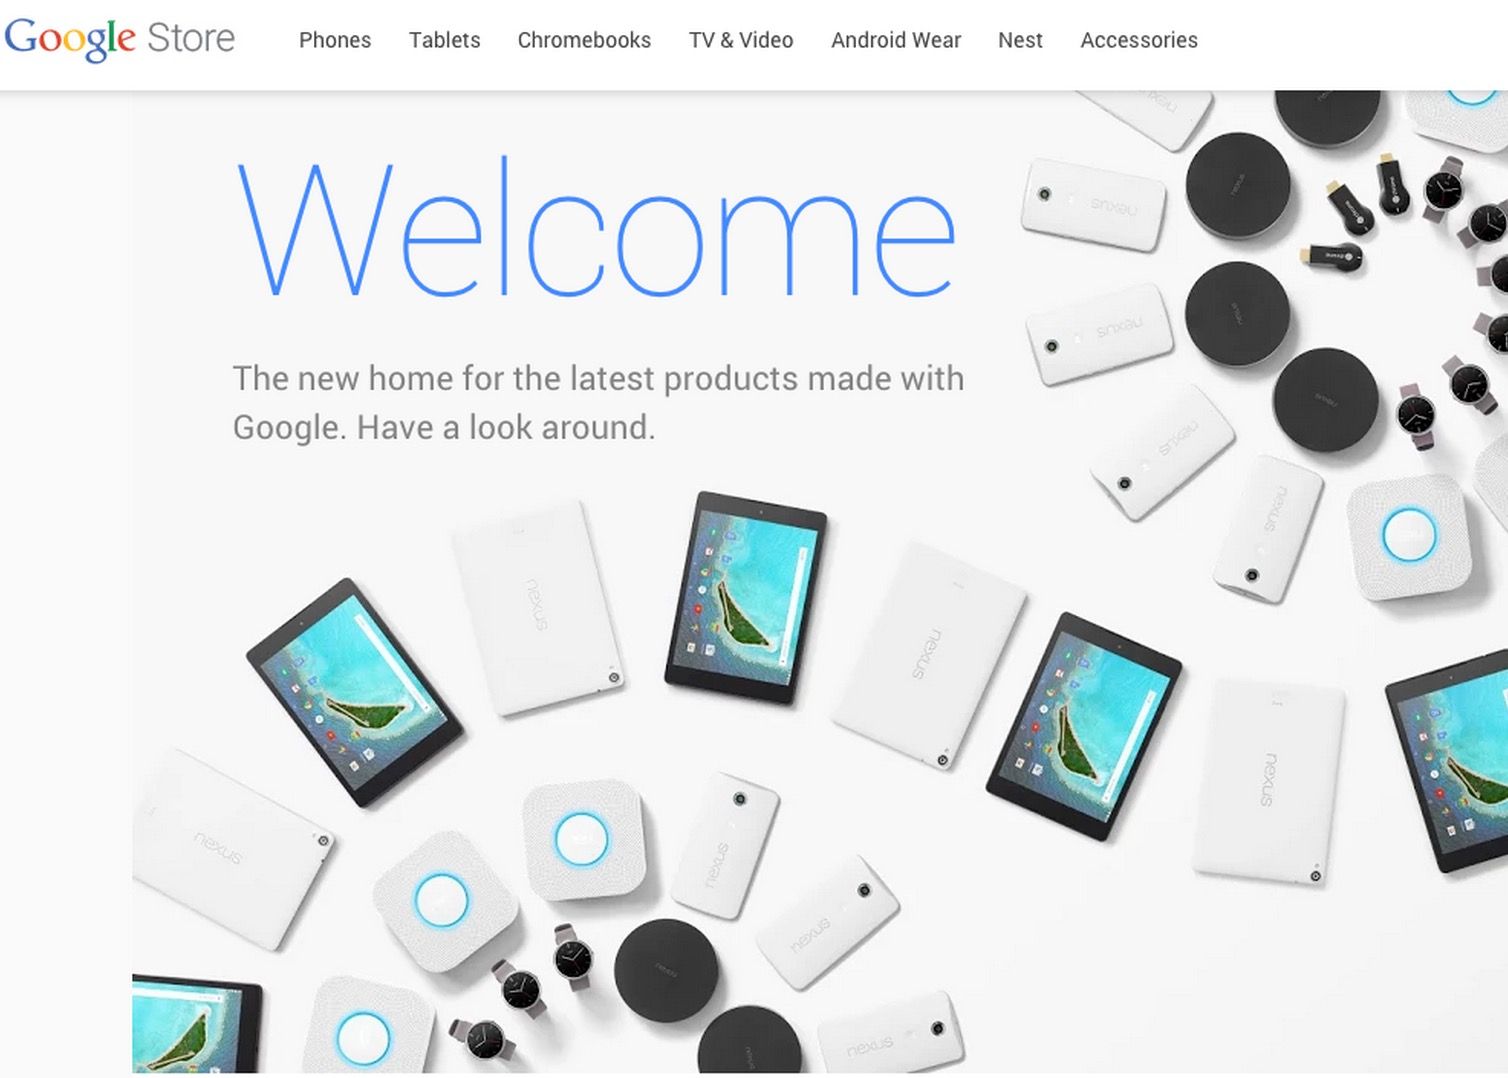 google now sells all hardware products through new store called google store image 1